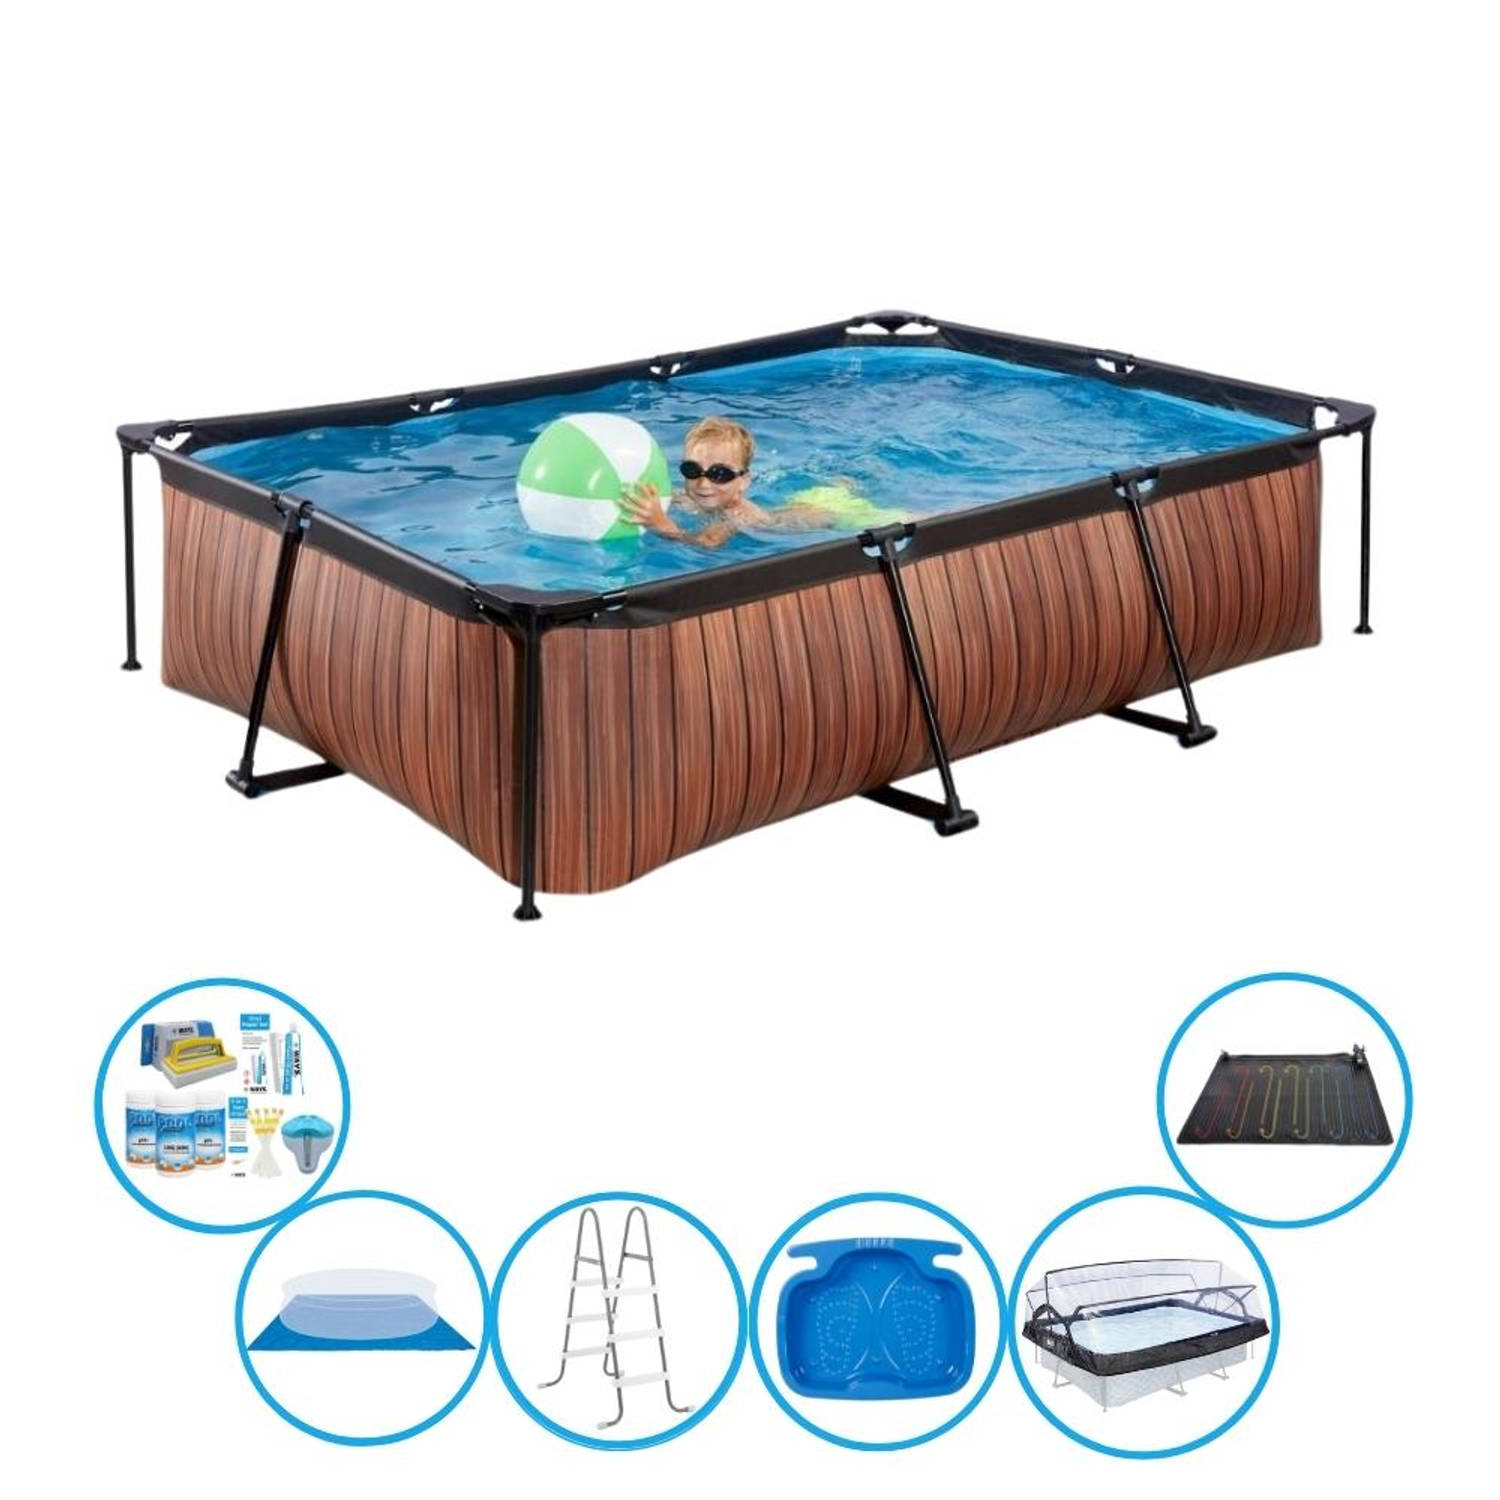 EXIT Zwembad Timber Style - 300x200x65 cm - Frame Pool - Inclusief toebehoren